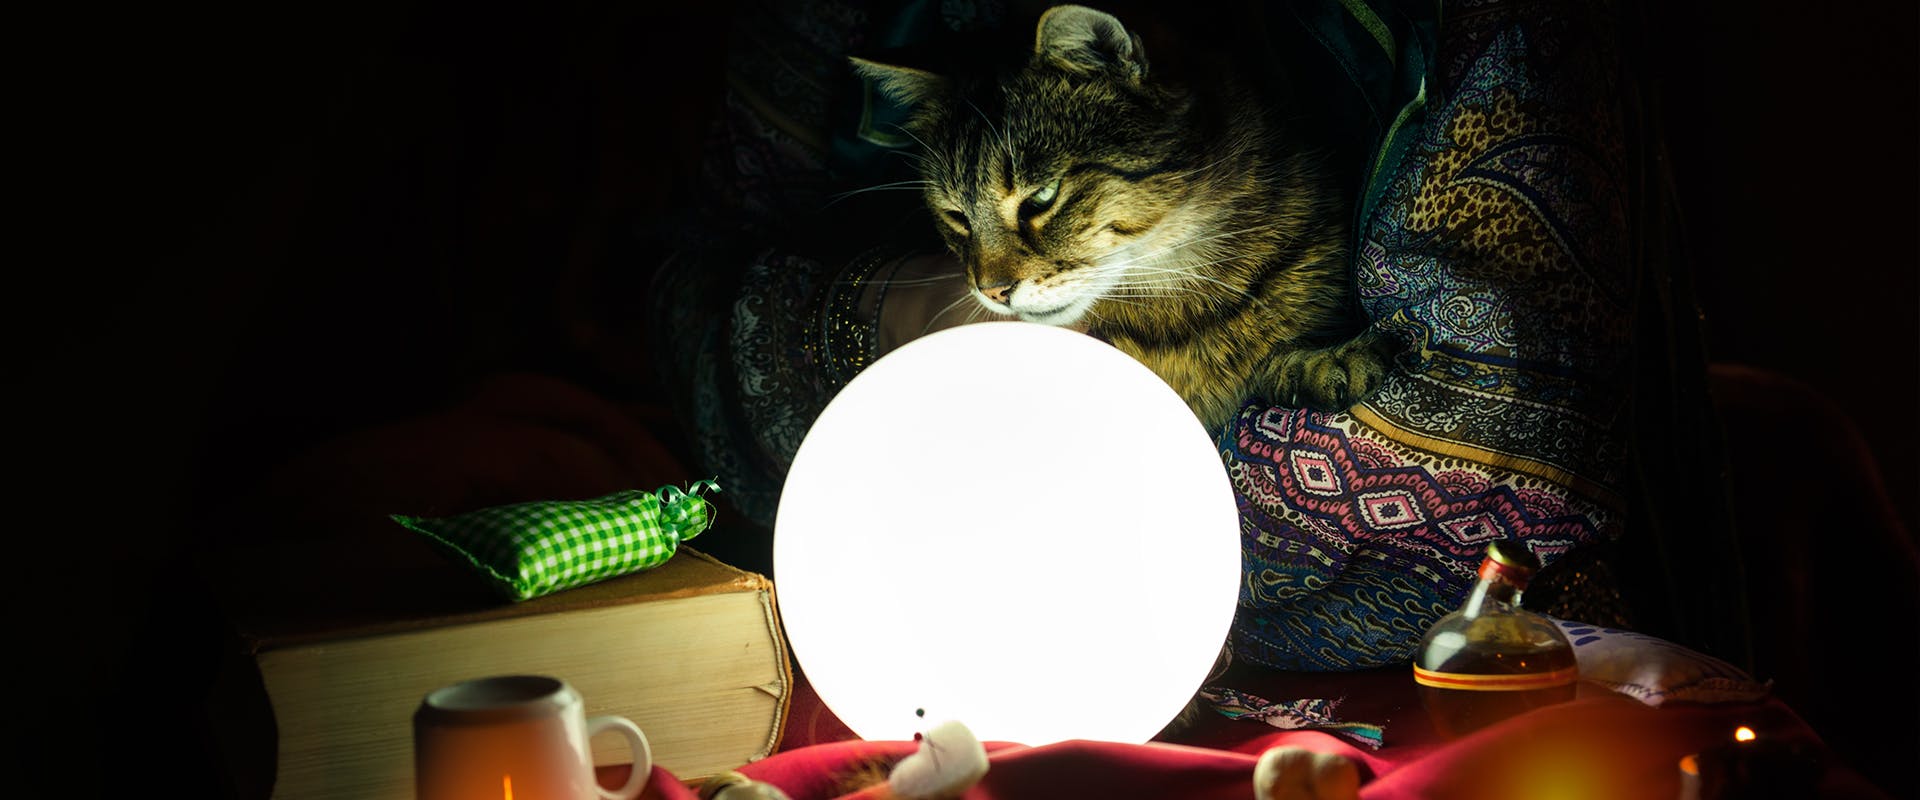 A mystical tabby cat looking into a glowing crystal ball